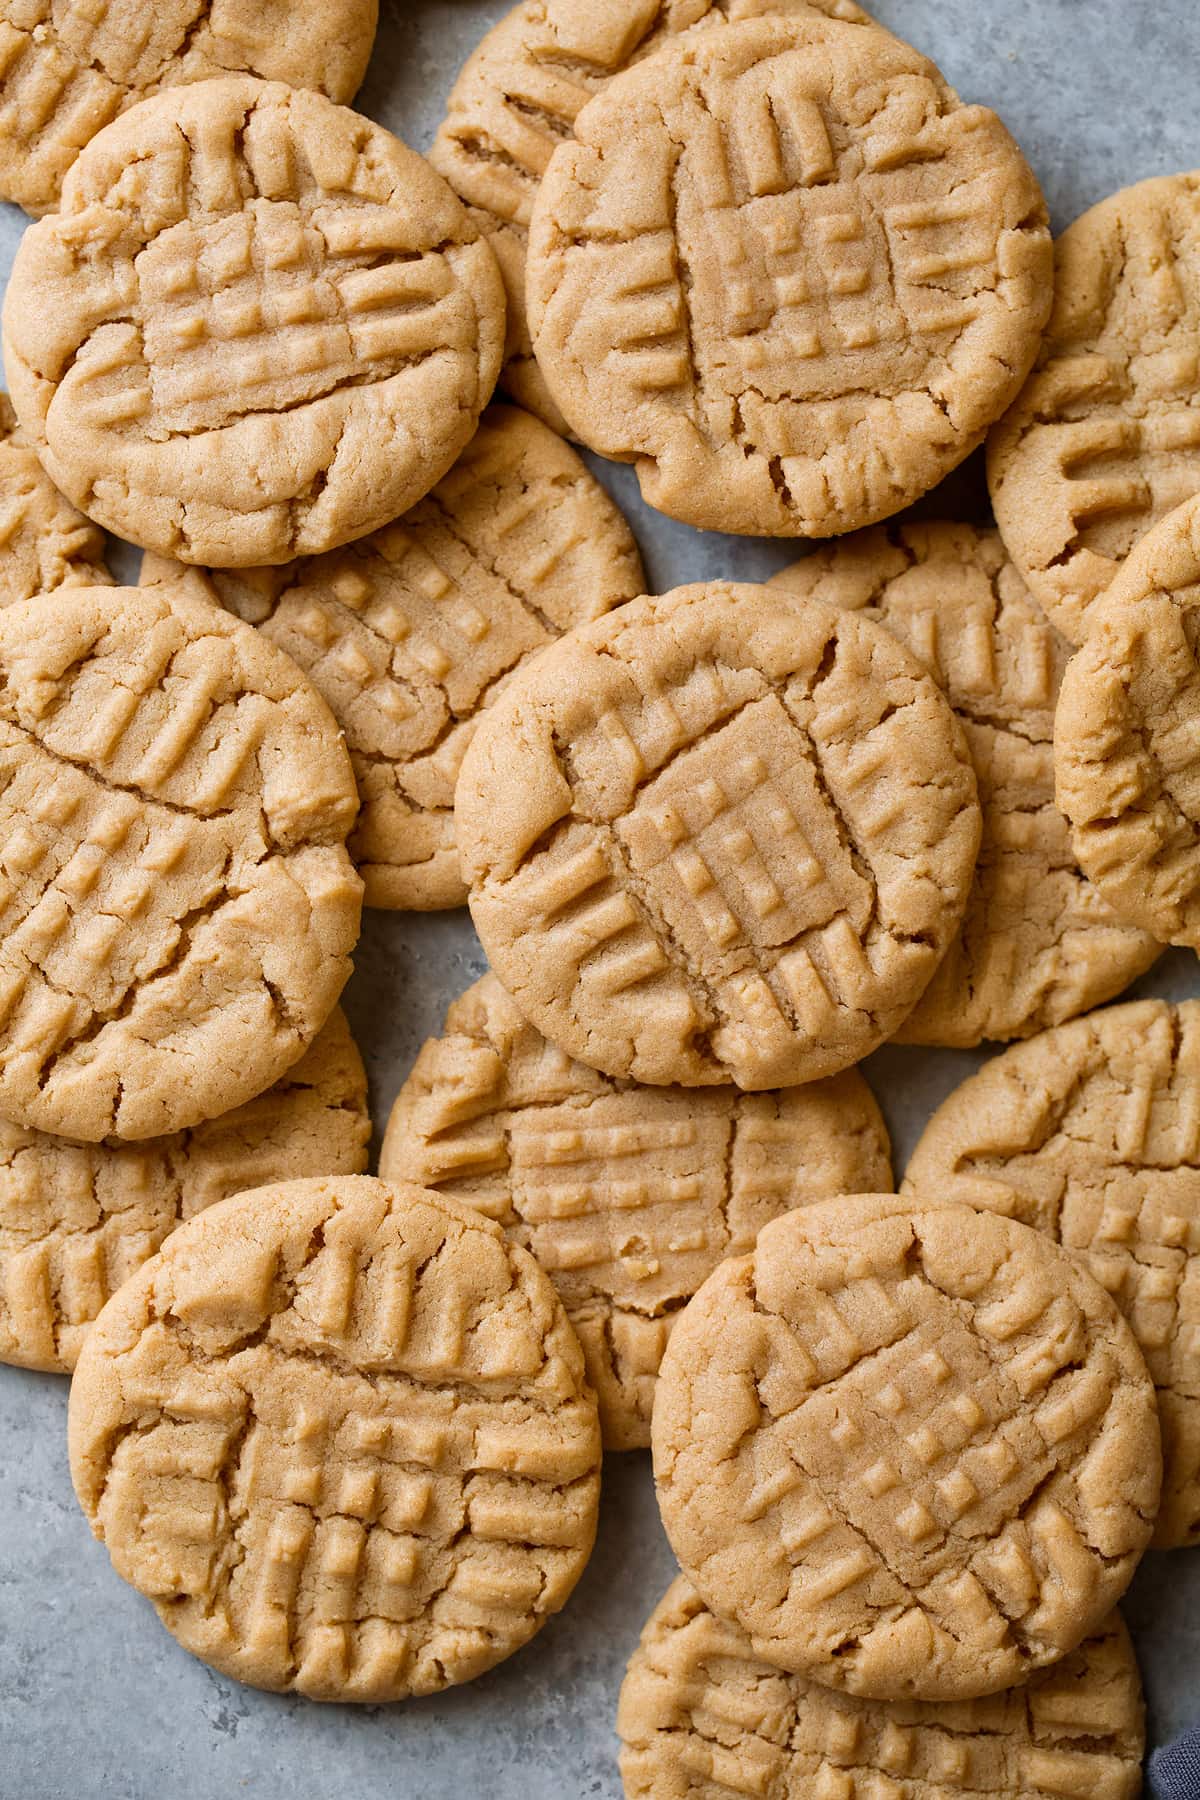 Homemade Peanut Butter Cookies stacked on a grey surface.